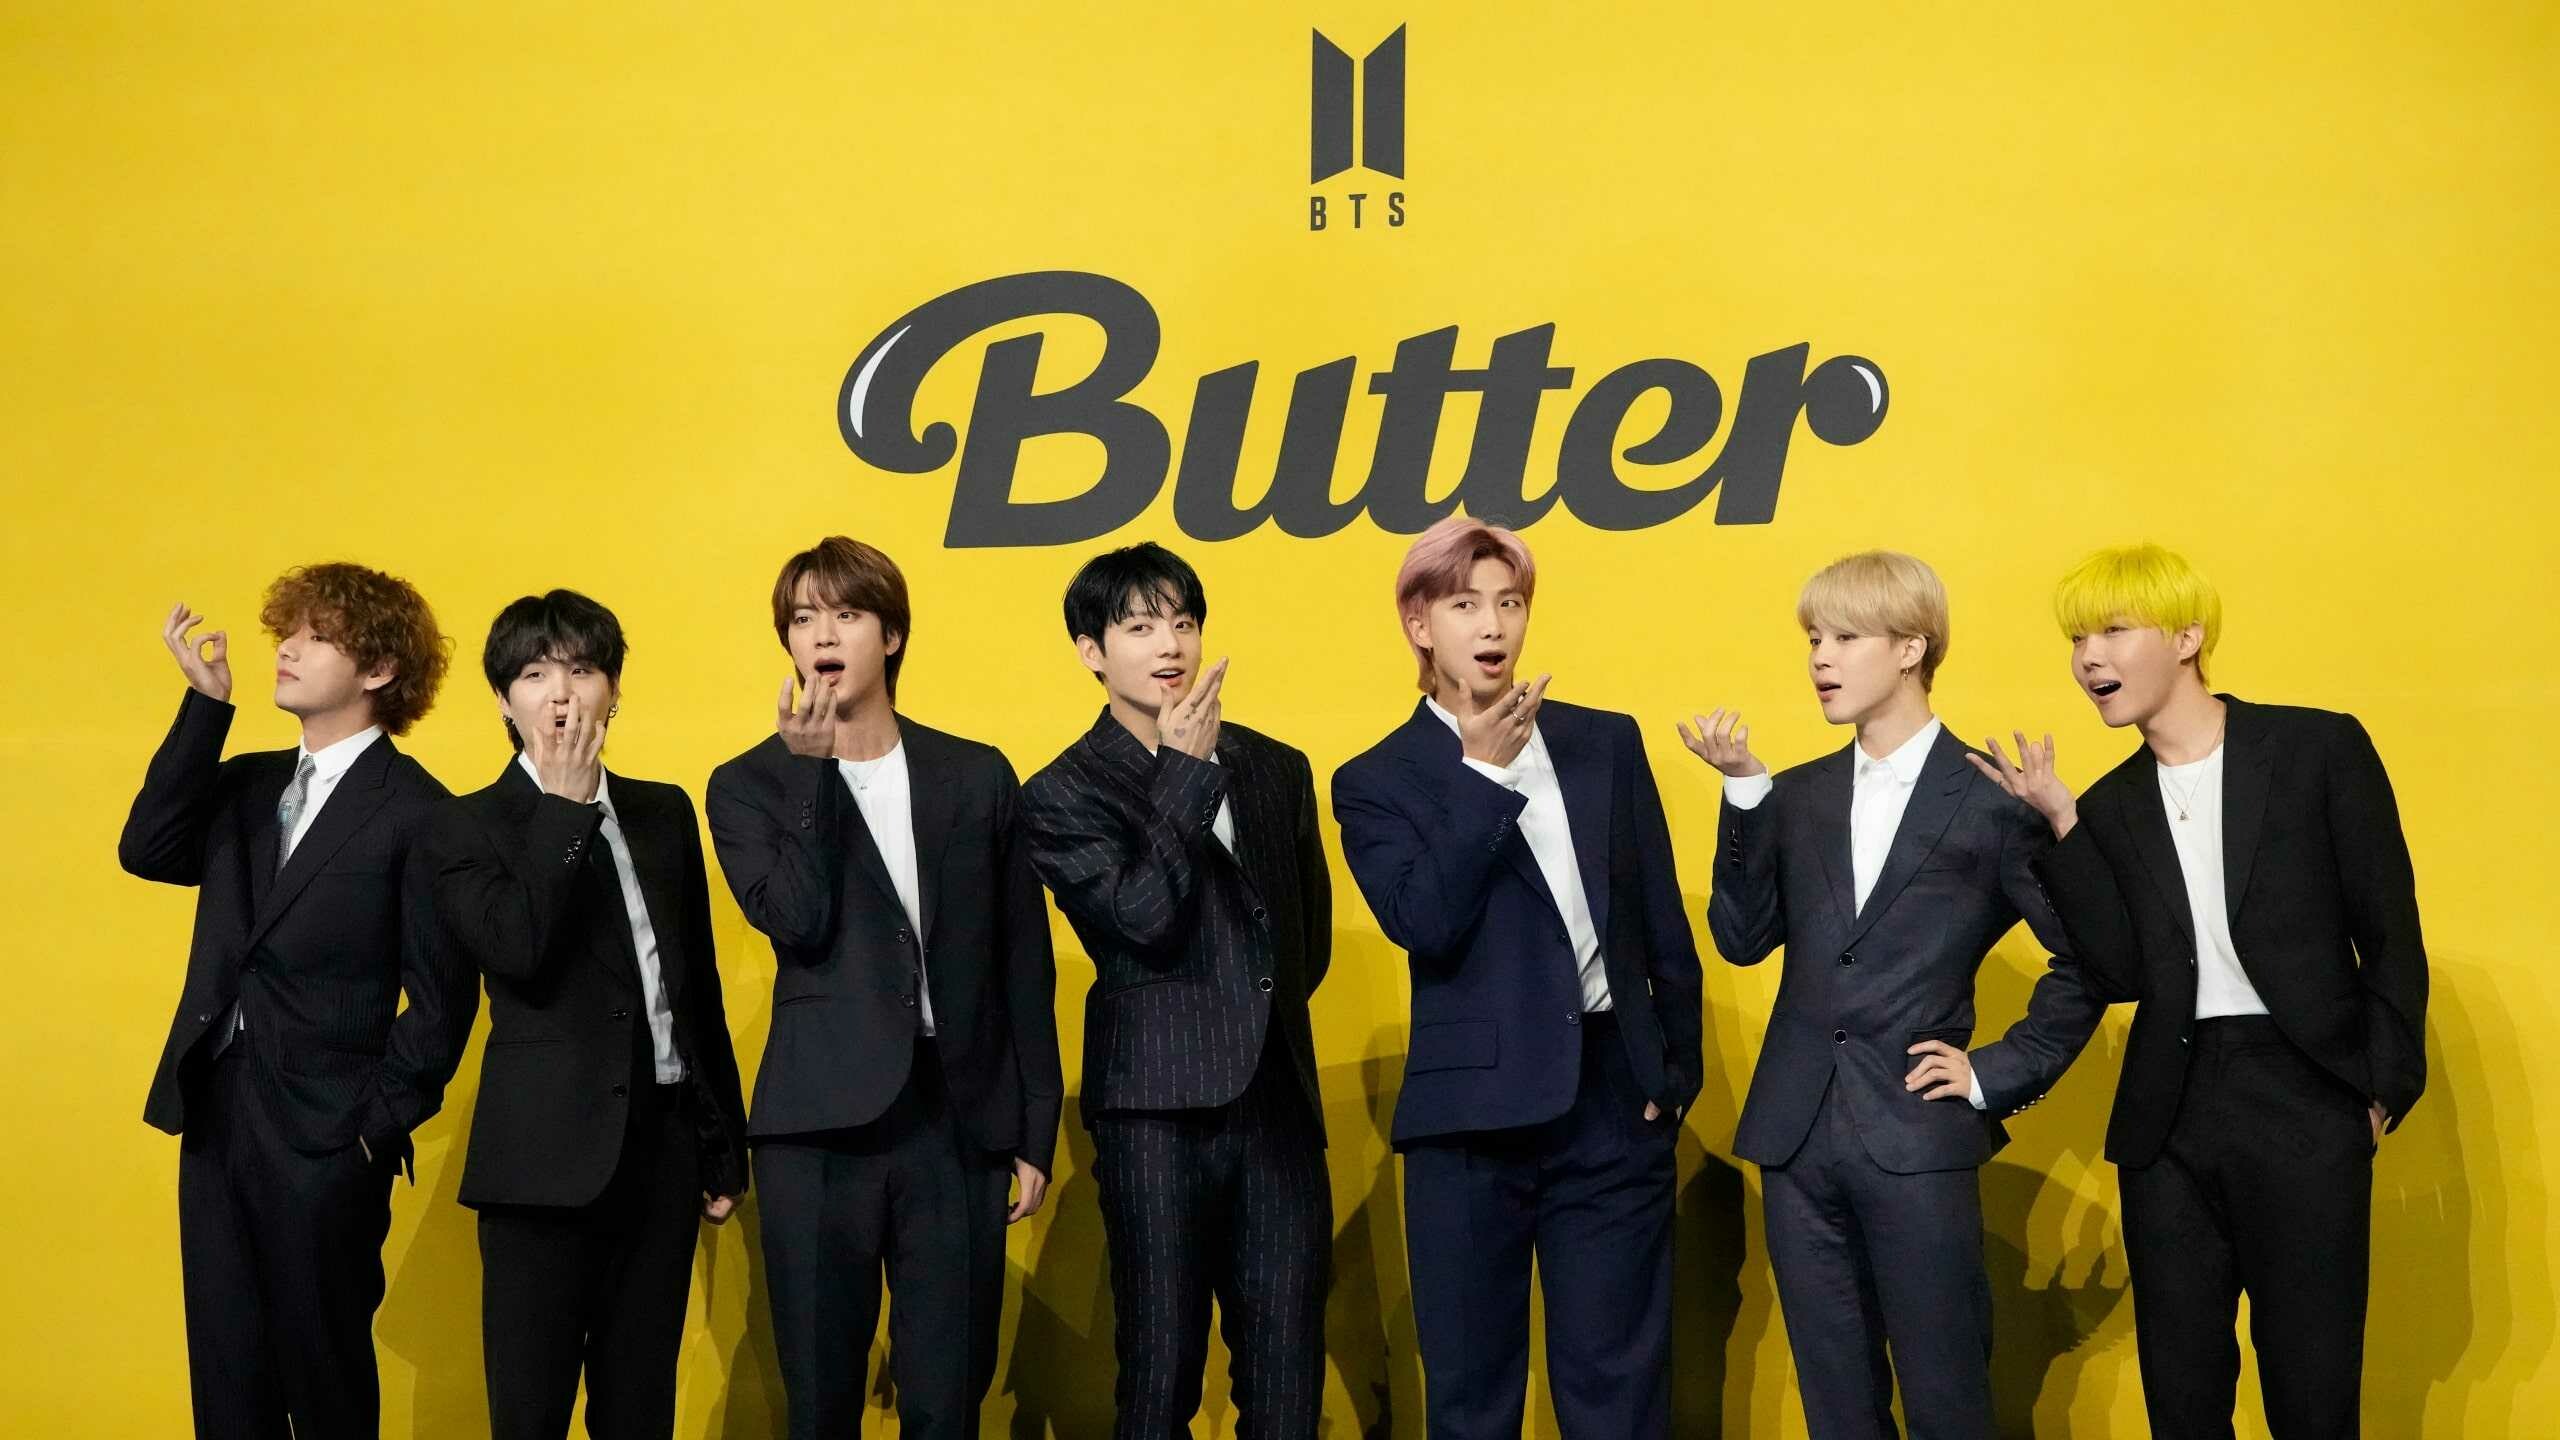 BTS: "Butter" was released as a digital single on May 21, 2021. 2560x1440 HD Background.